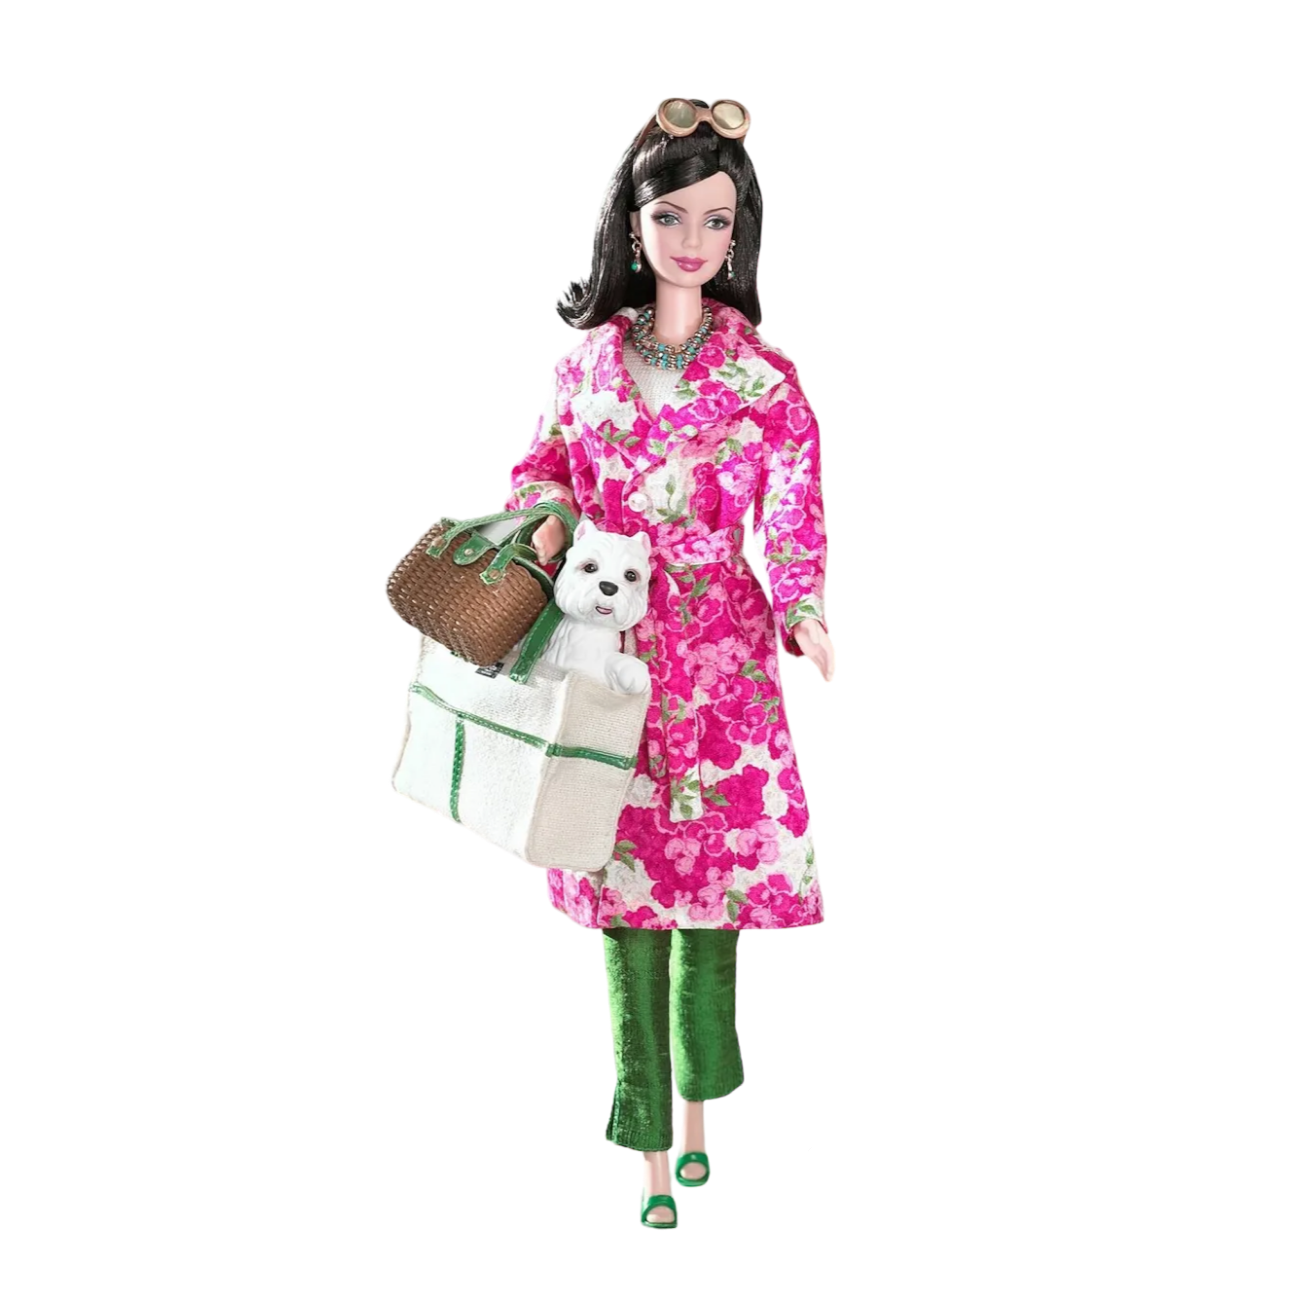 Kate Spade Barbie doll wearing green trousers and a floral trench coat, carrying a picnic basket and tote bag with a white westie dog in it.